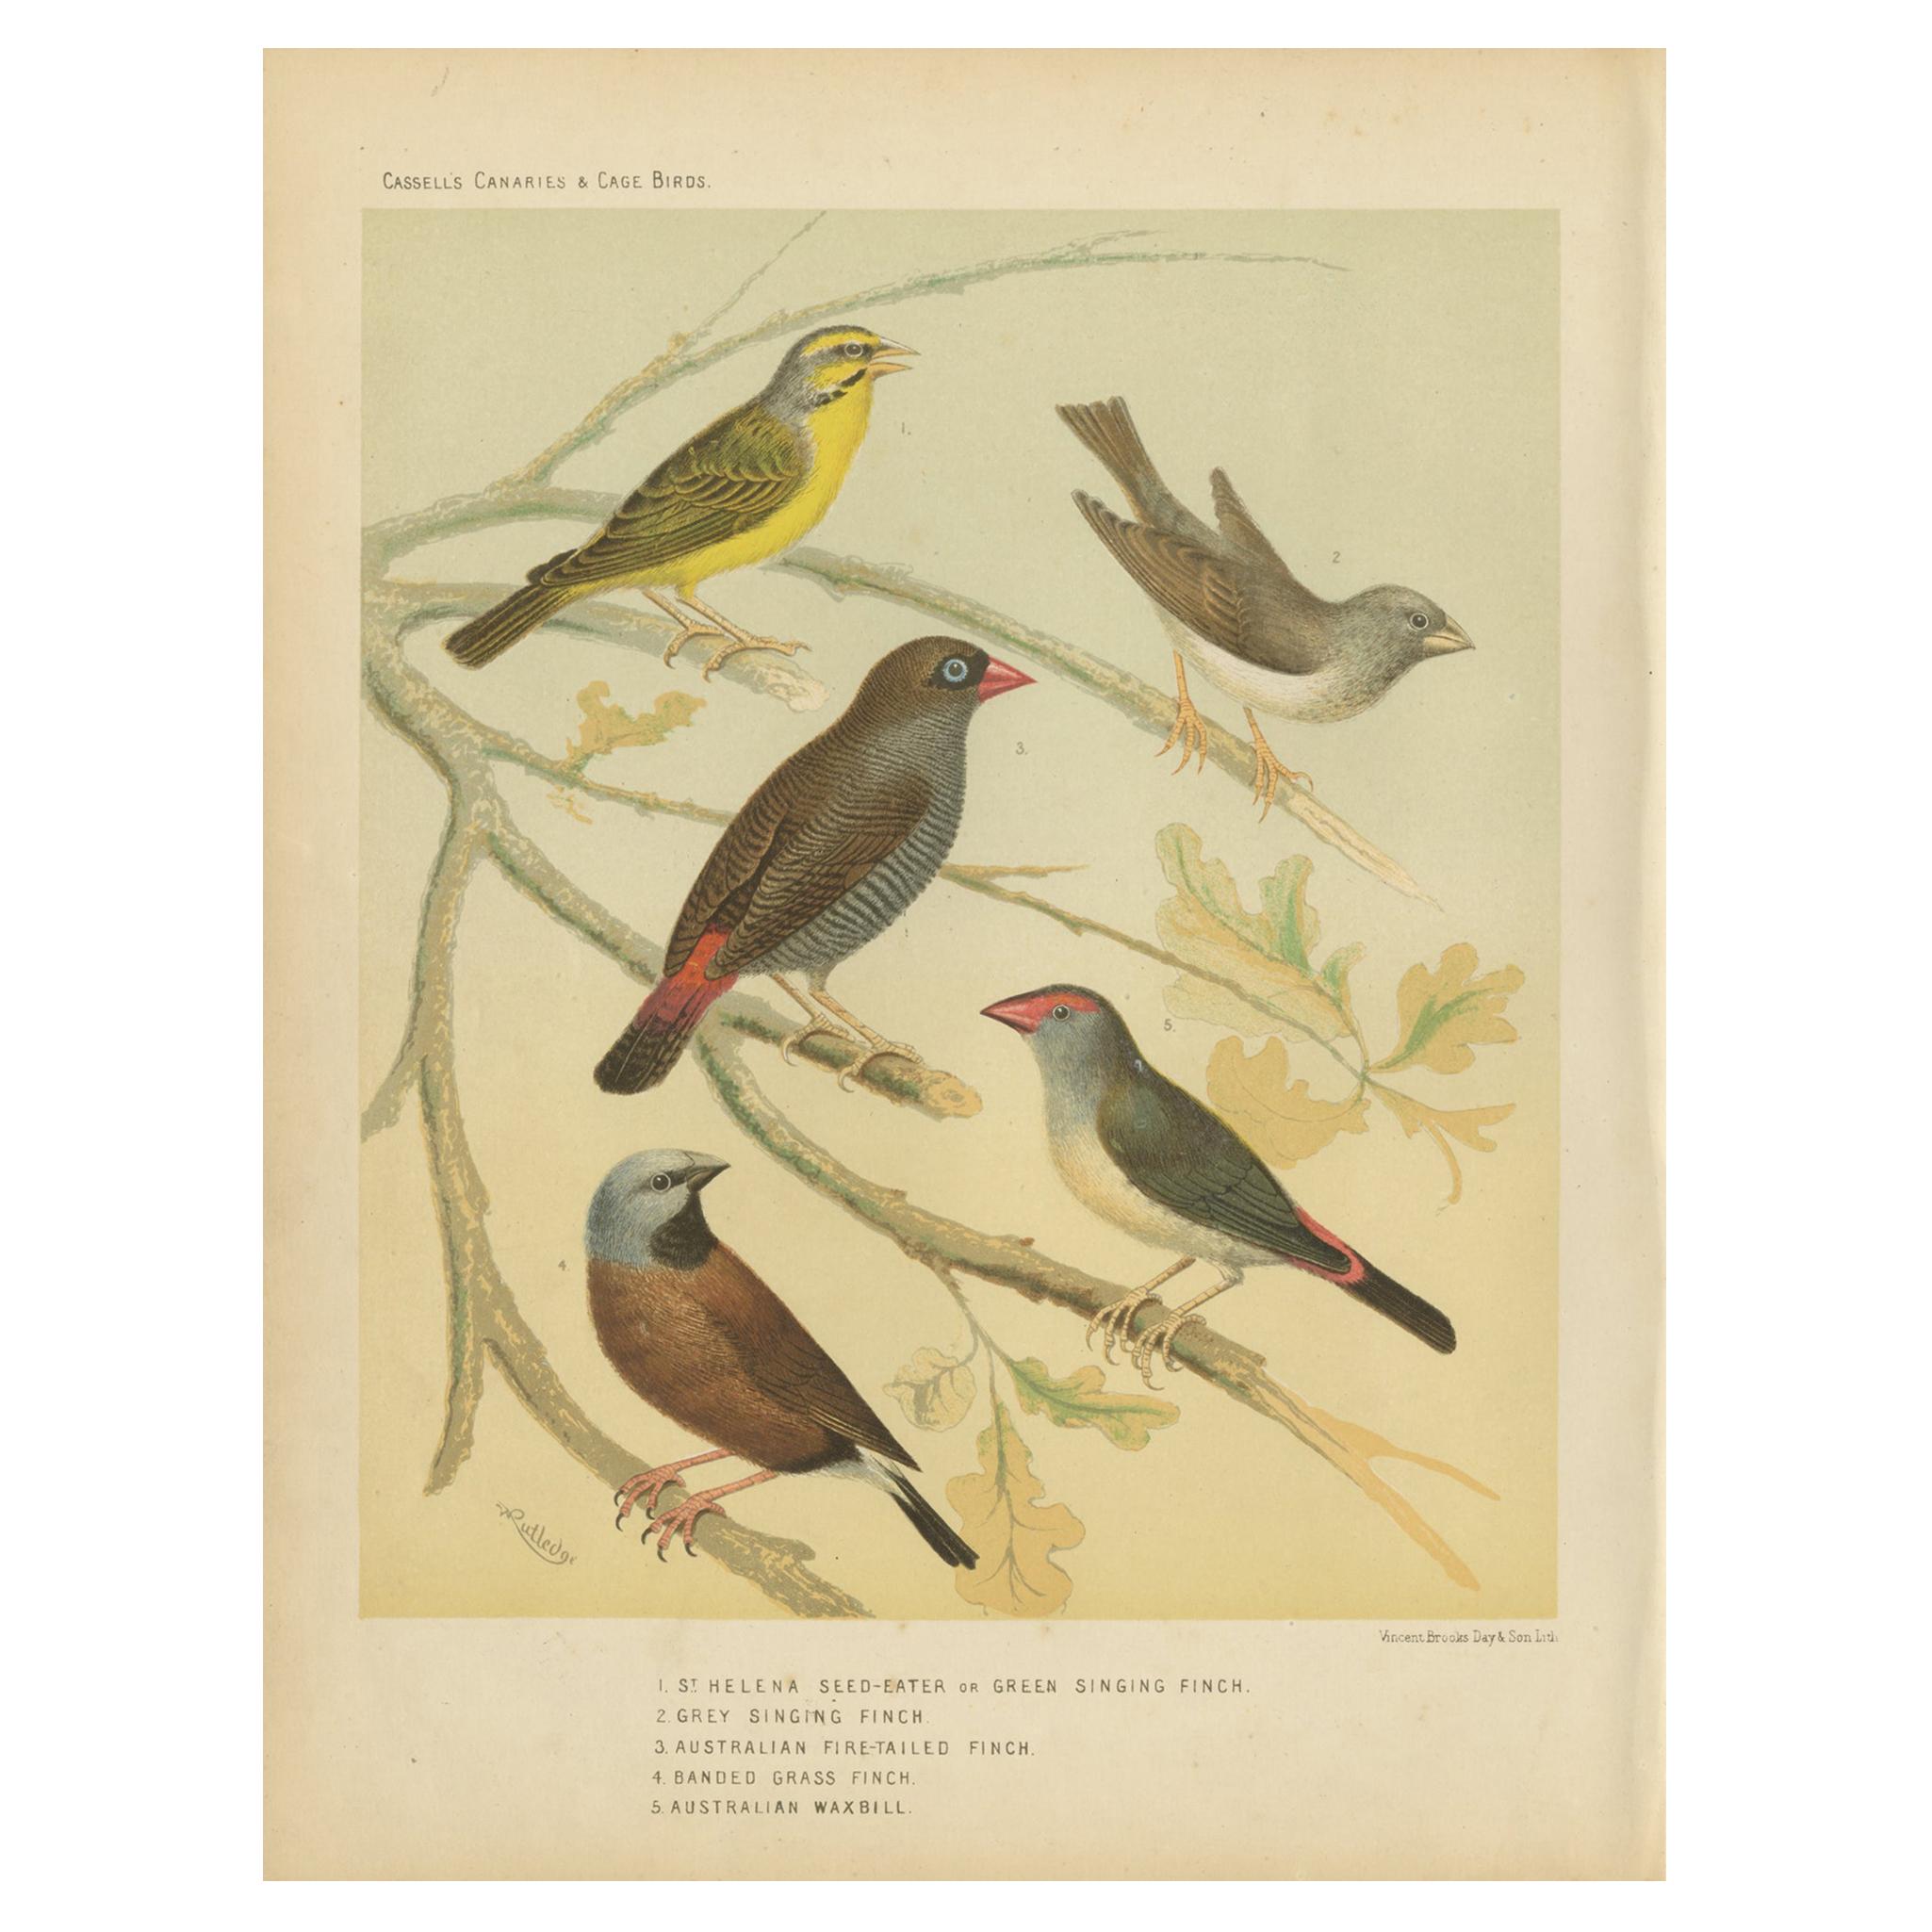 Antique Bird Print of the Green Singing Finch, Grey Singing Finch and Others For Sale